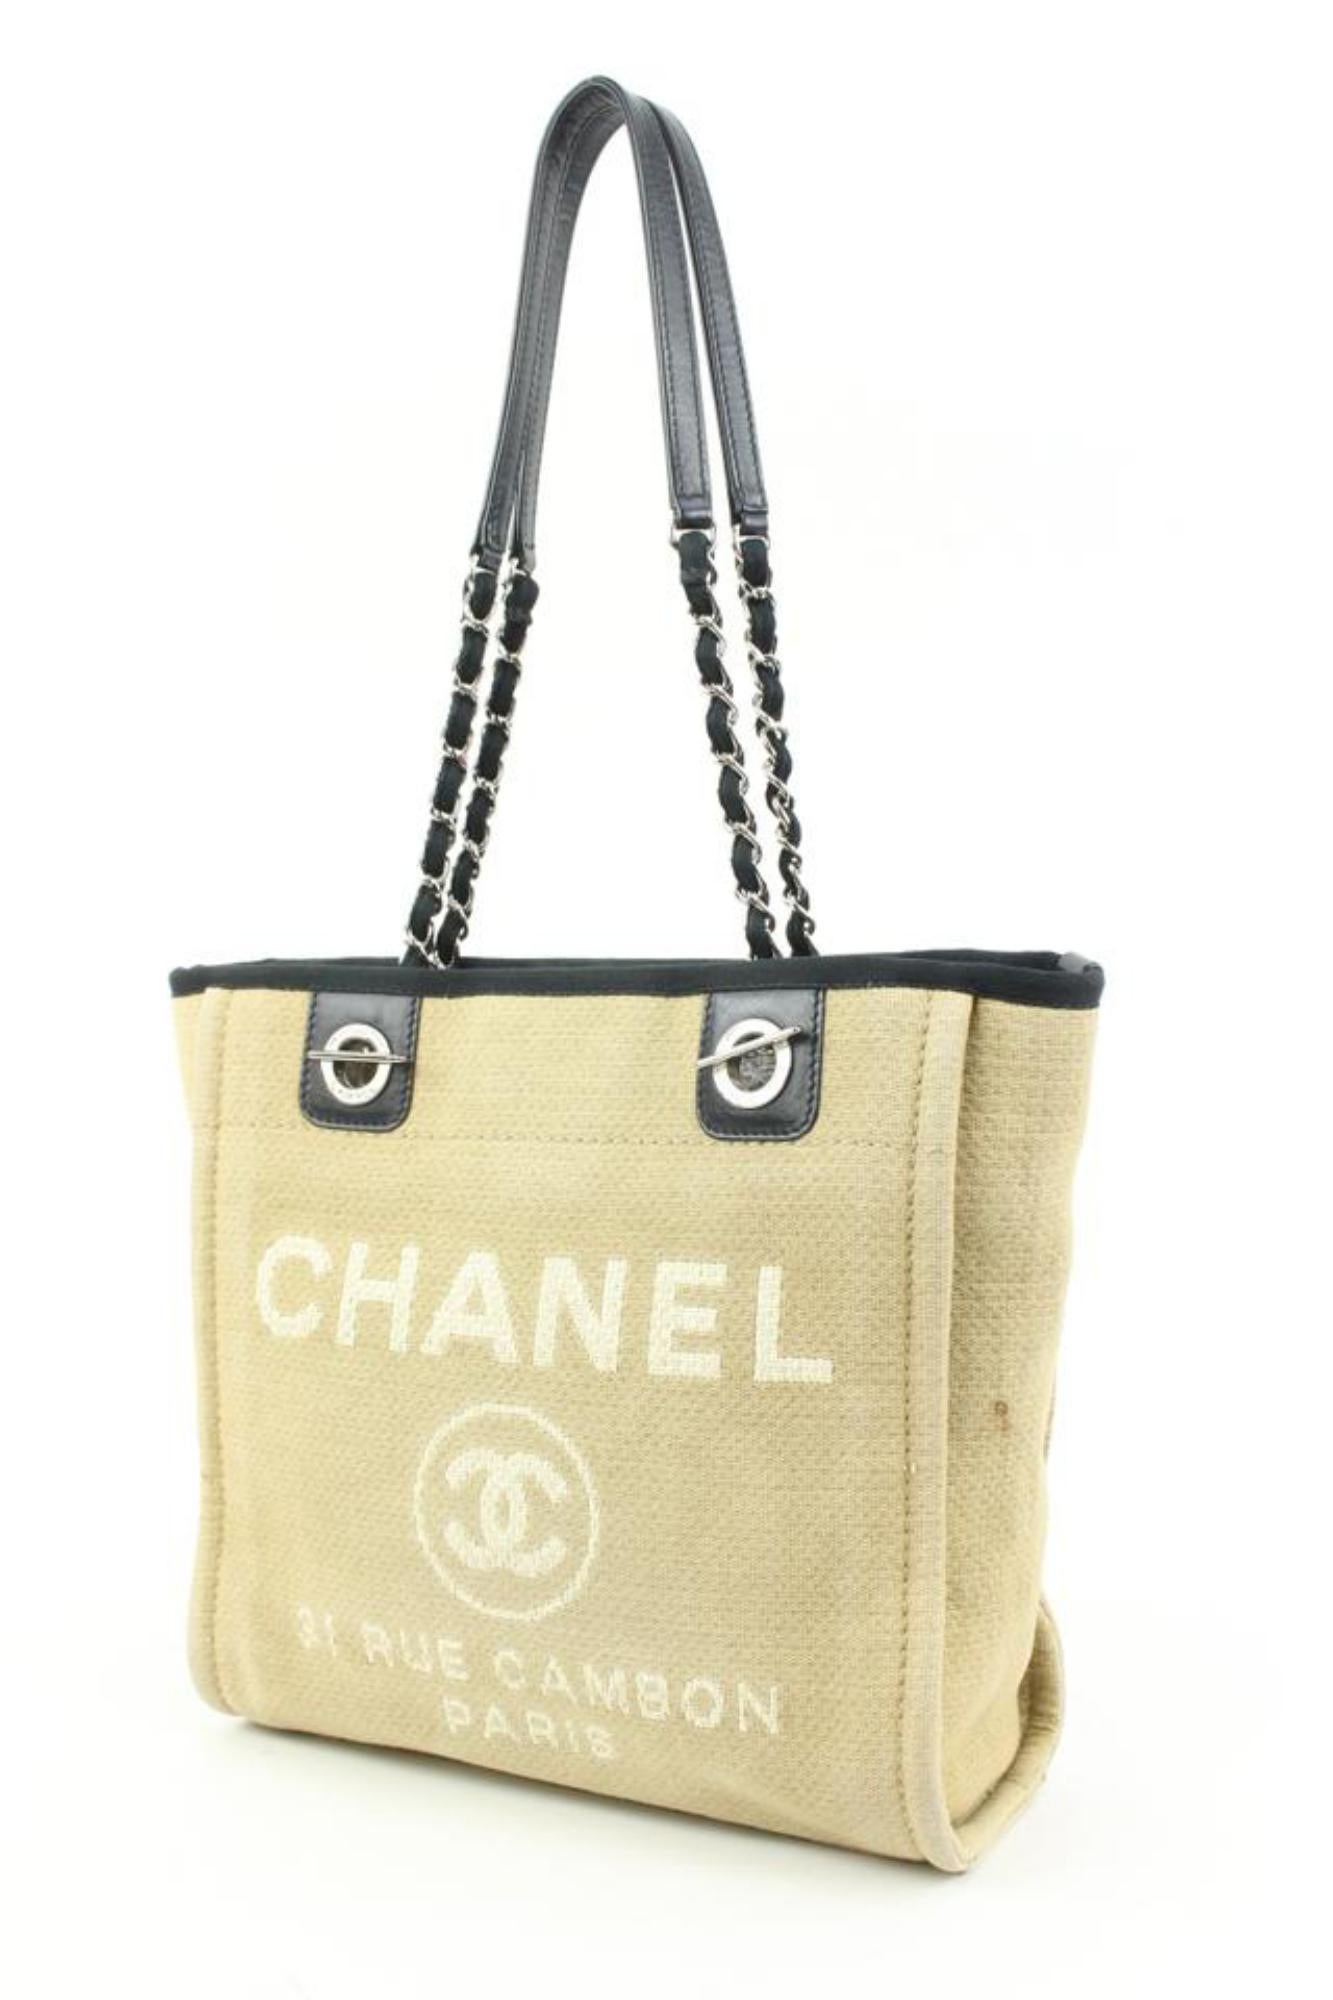 Chanel Beige Deauville PM Chain Tote Bag 51c128s
Date Code/Serial Number: 15794390
Made In: Italy
Measurements: Length:  12.5